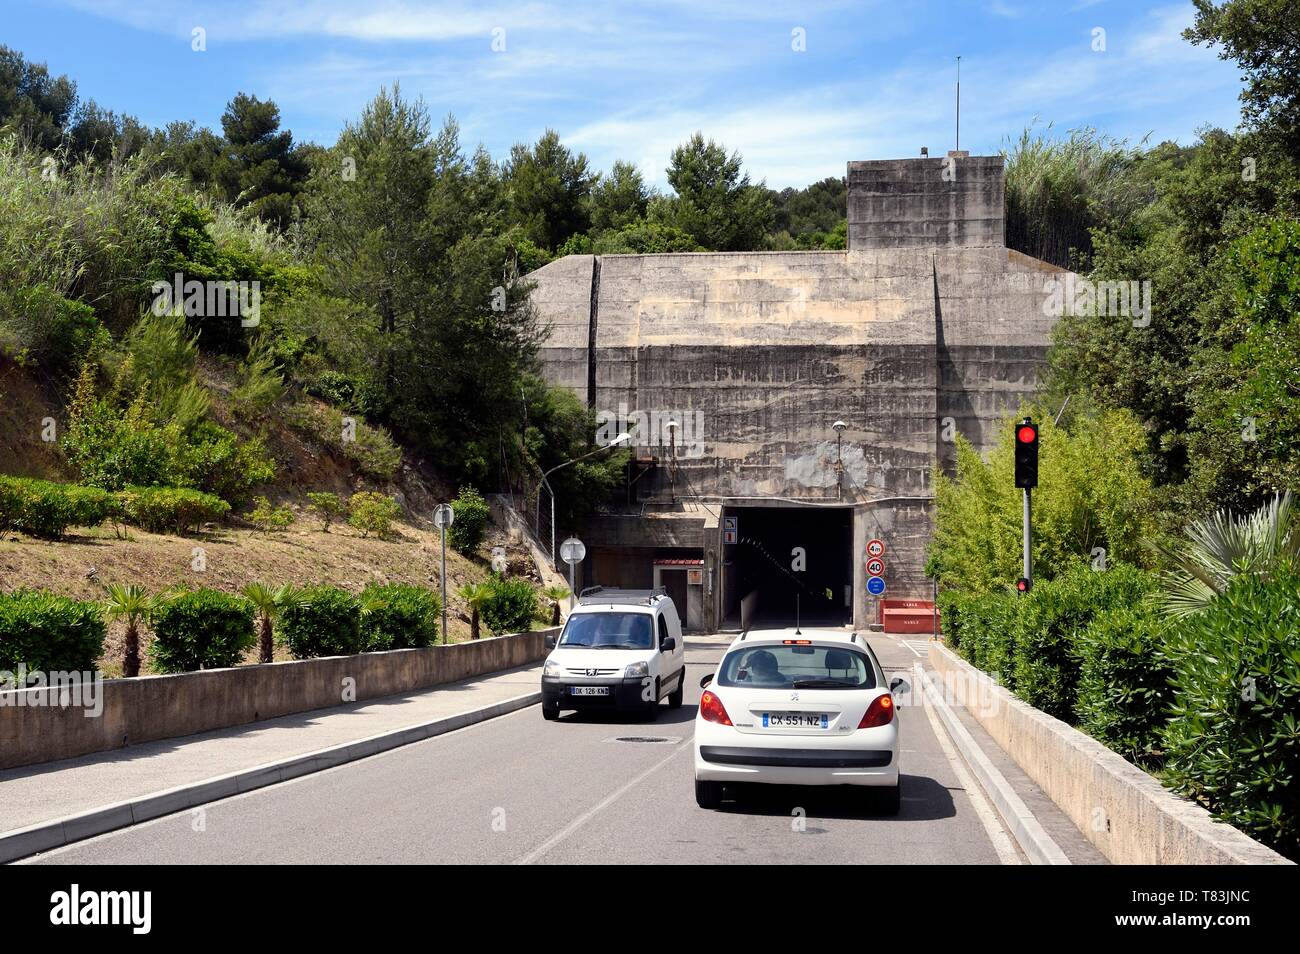 France, Var, Saint Mandrier sur Mer next to Toulon, Pôle Ecoles Mediterranee (PEM) from the french navy, connecting tunnel built by the Germans during World War II Stock Photo